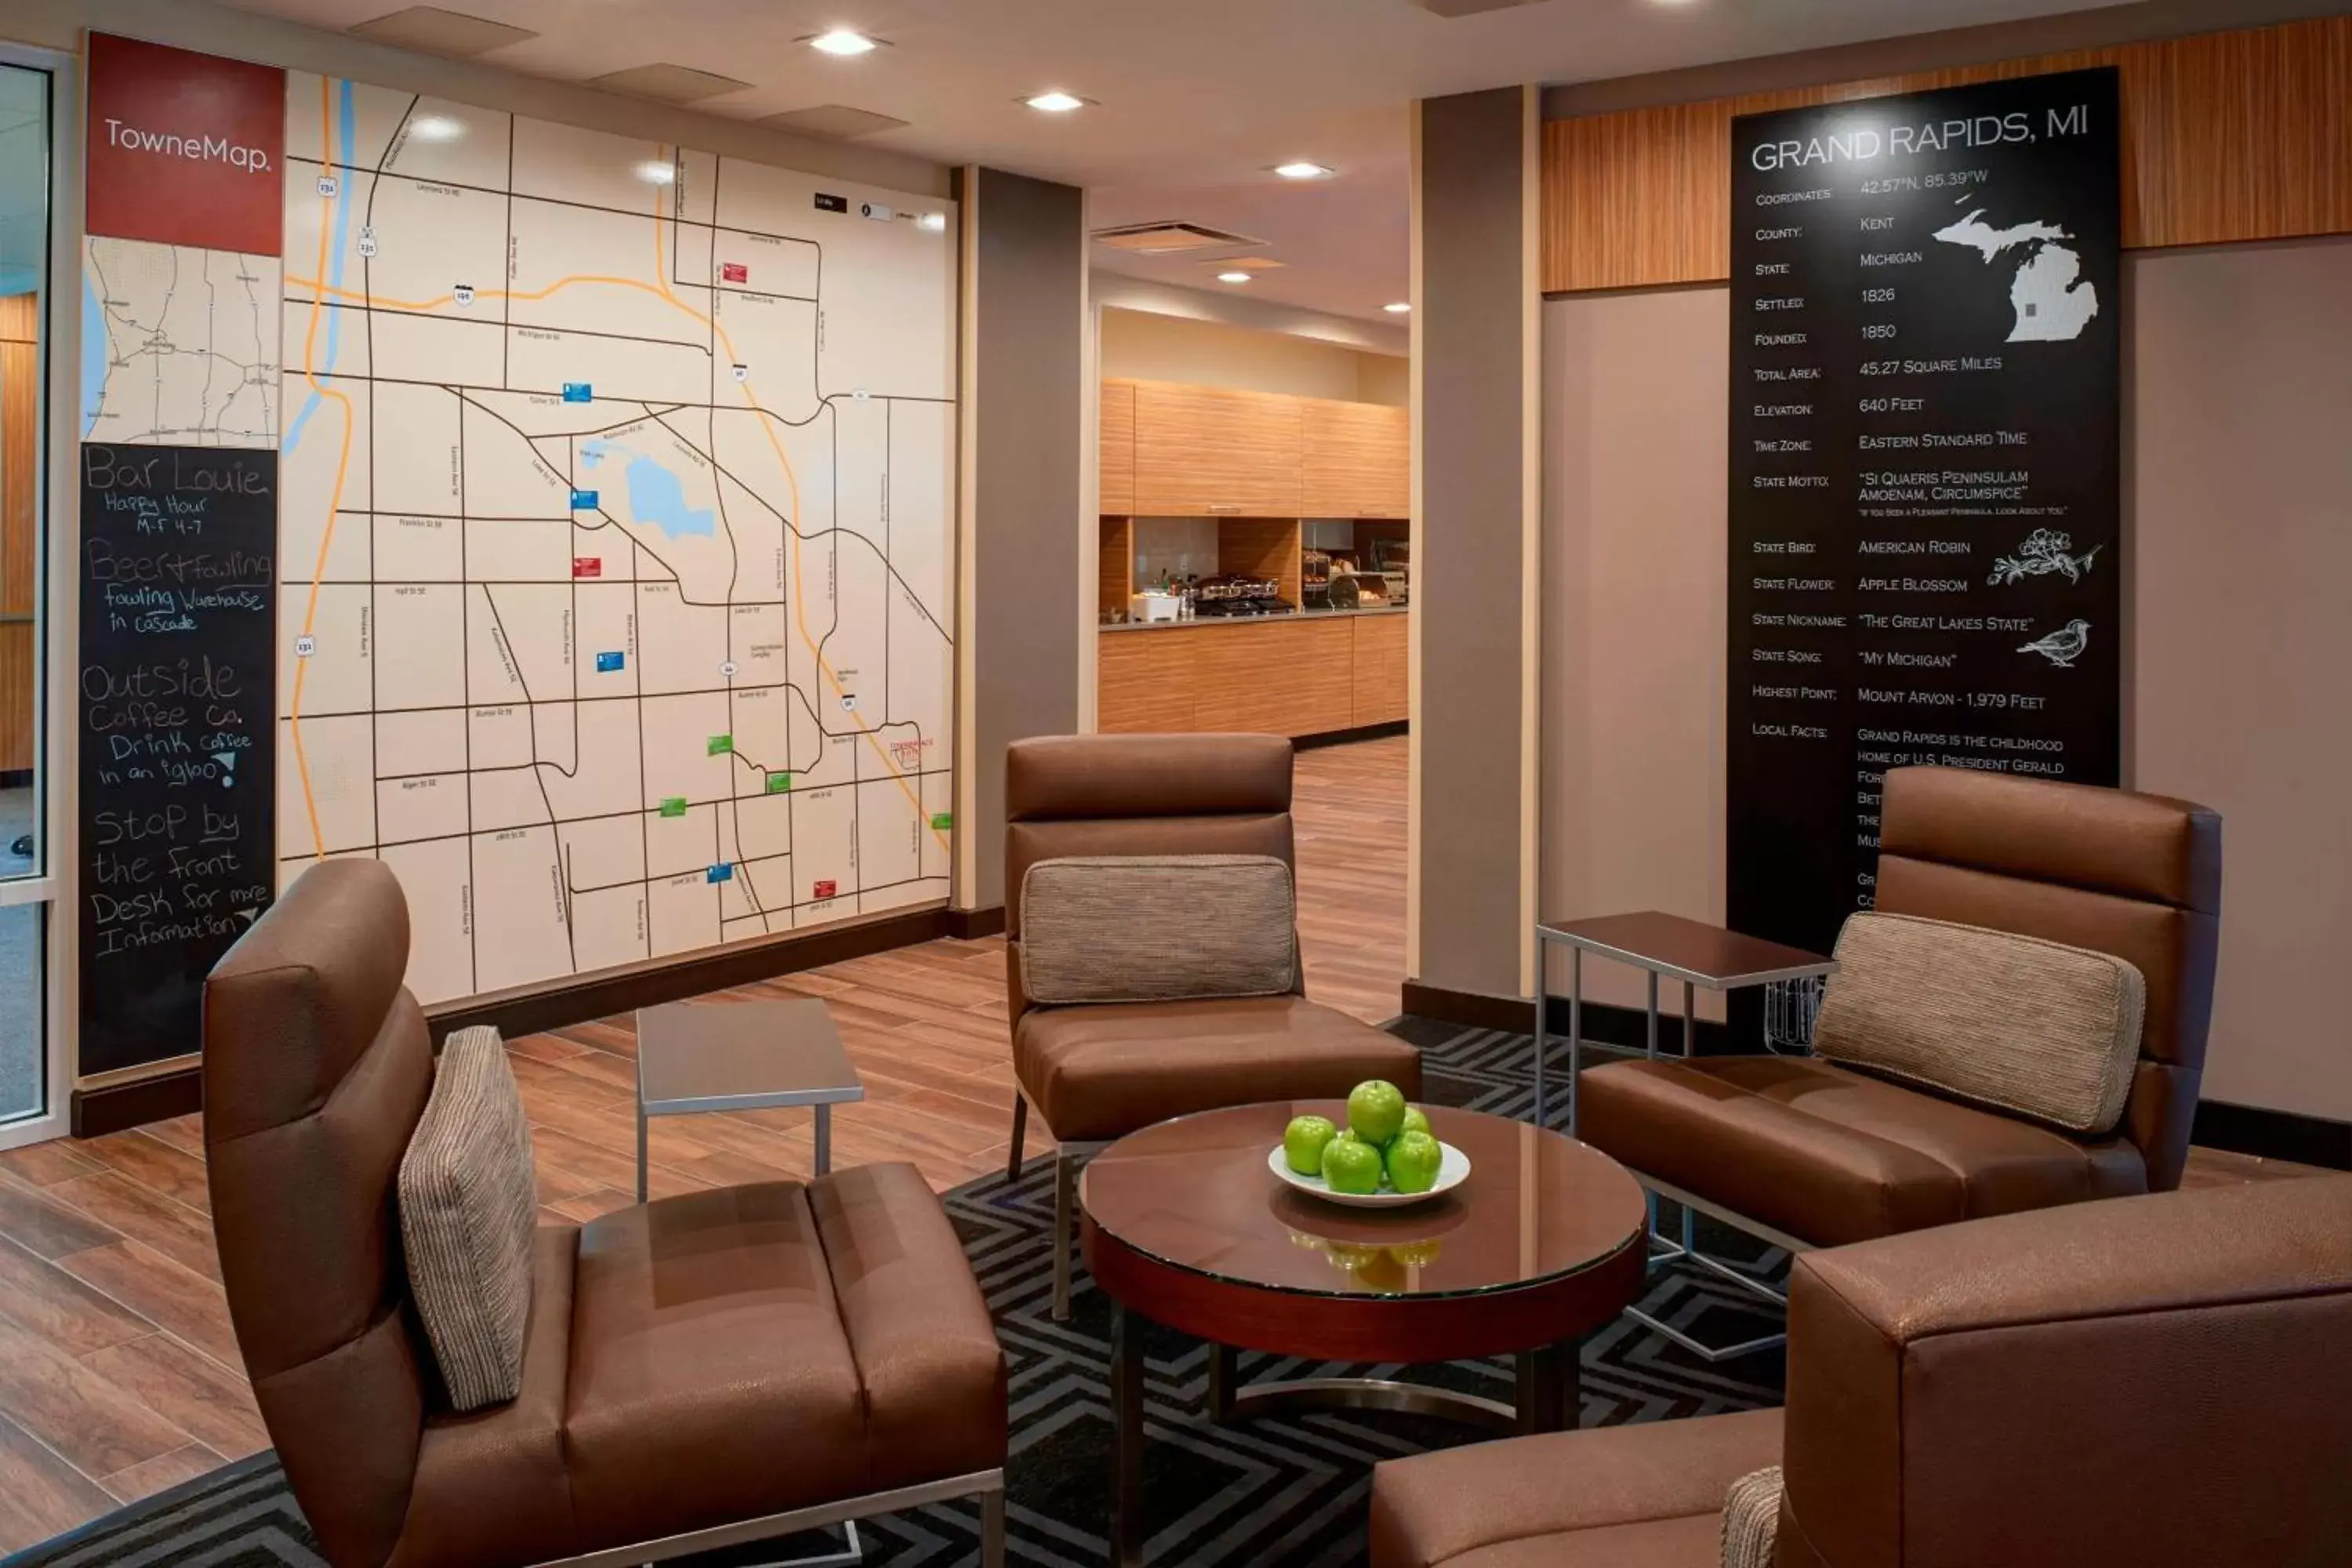 Location, Lobby/Reception in TownePlace Suites by Marriott Grand Rapids Airport